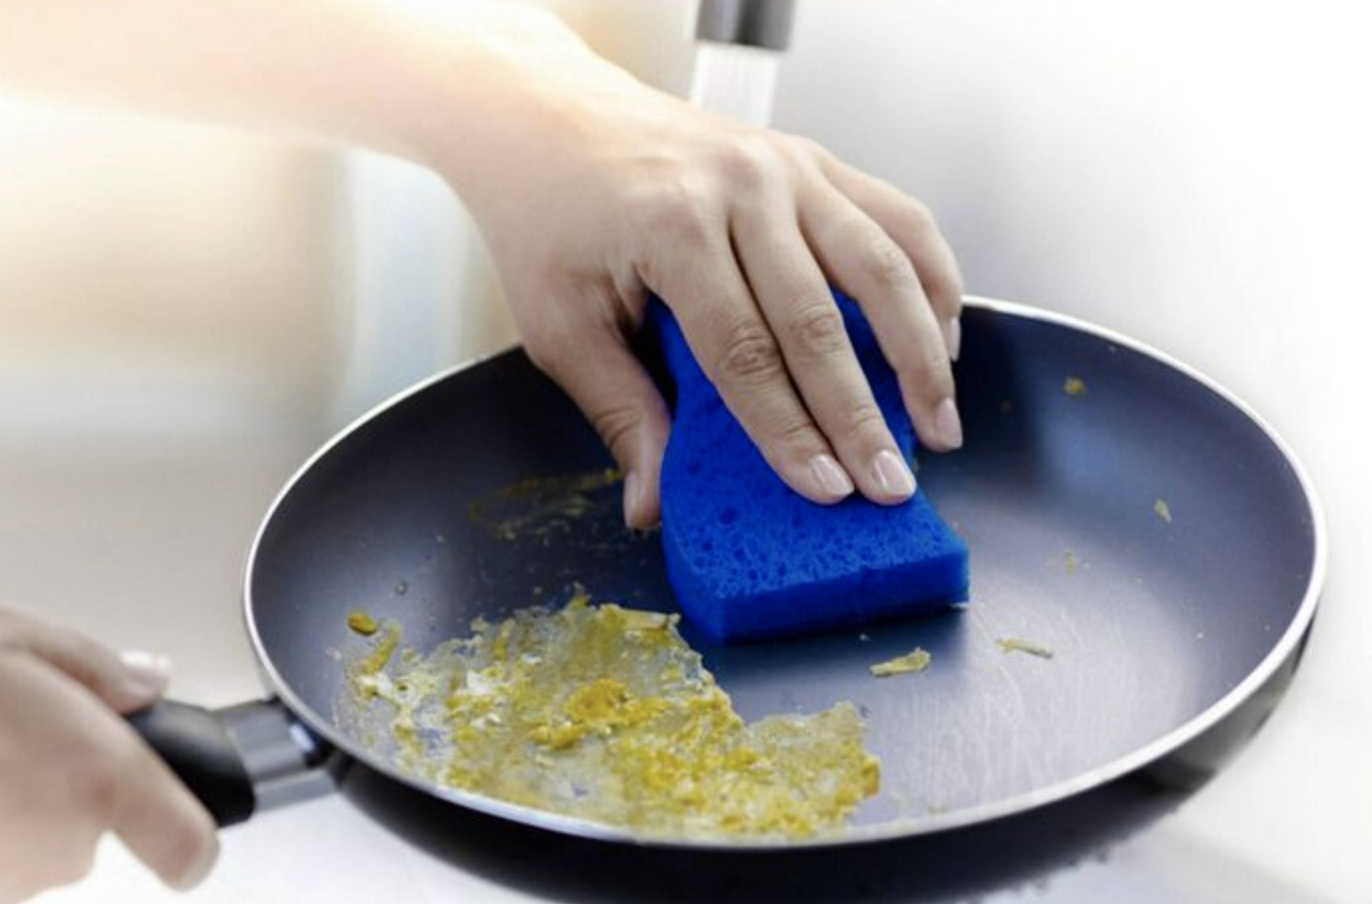 hand uses blue Scotch-Brite sponge to clean egg remains from pan